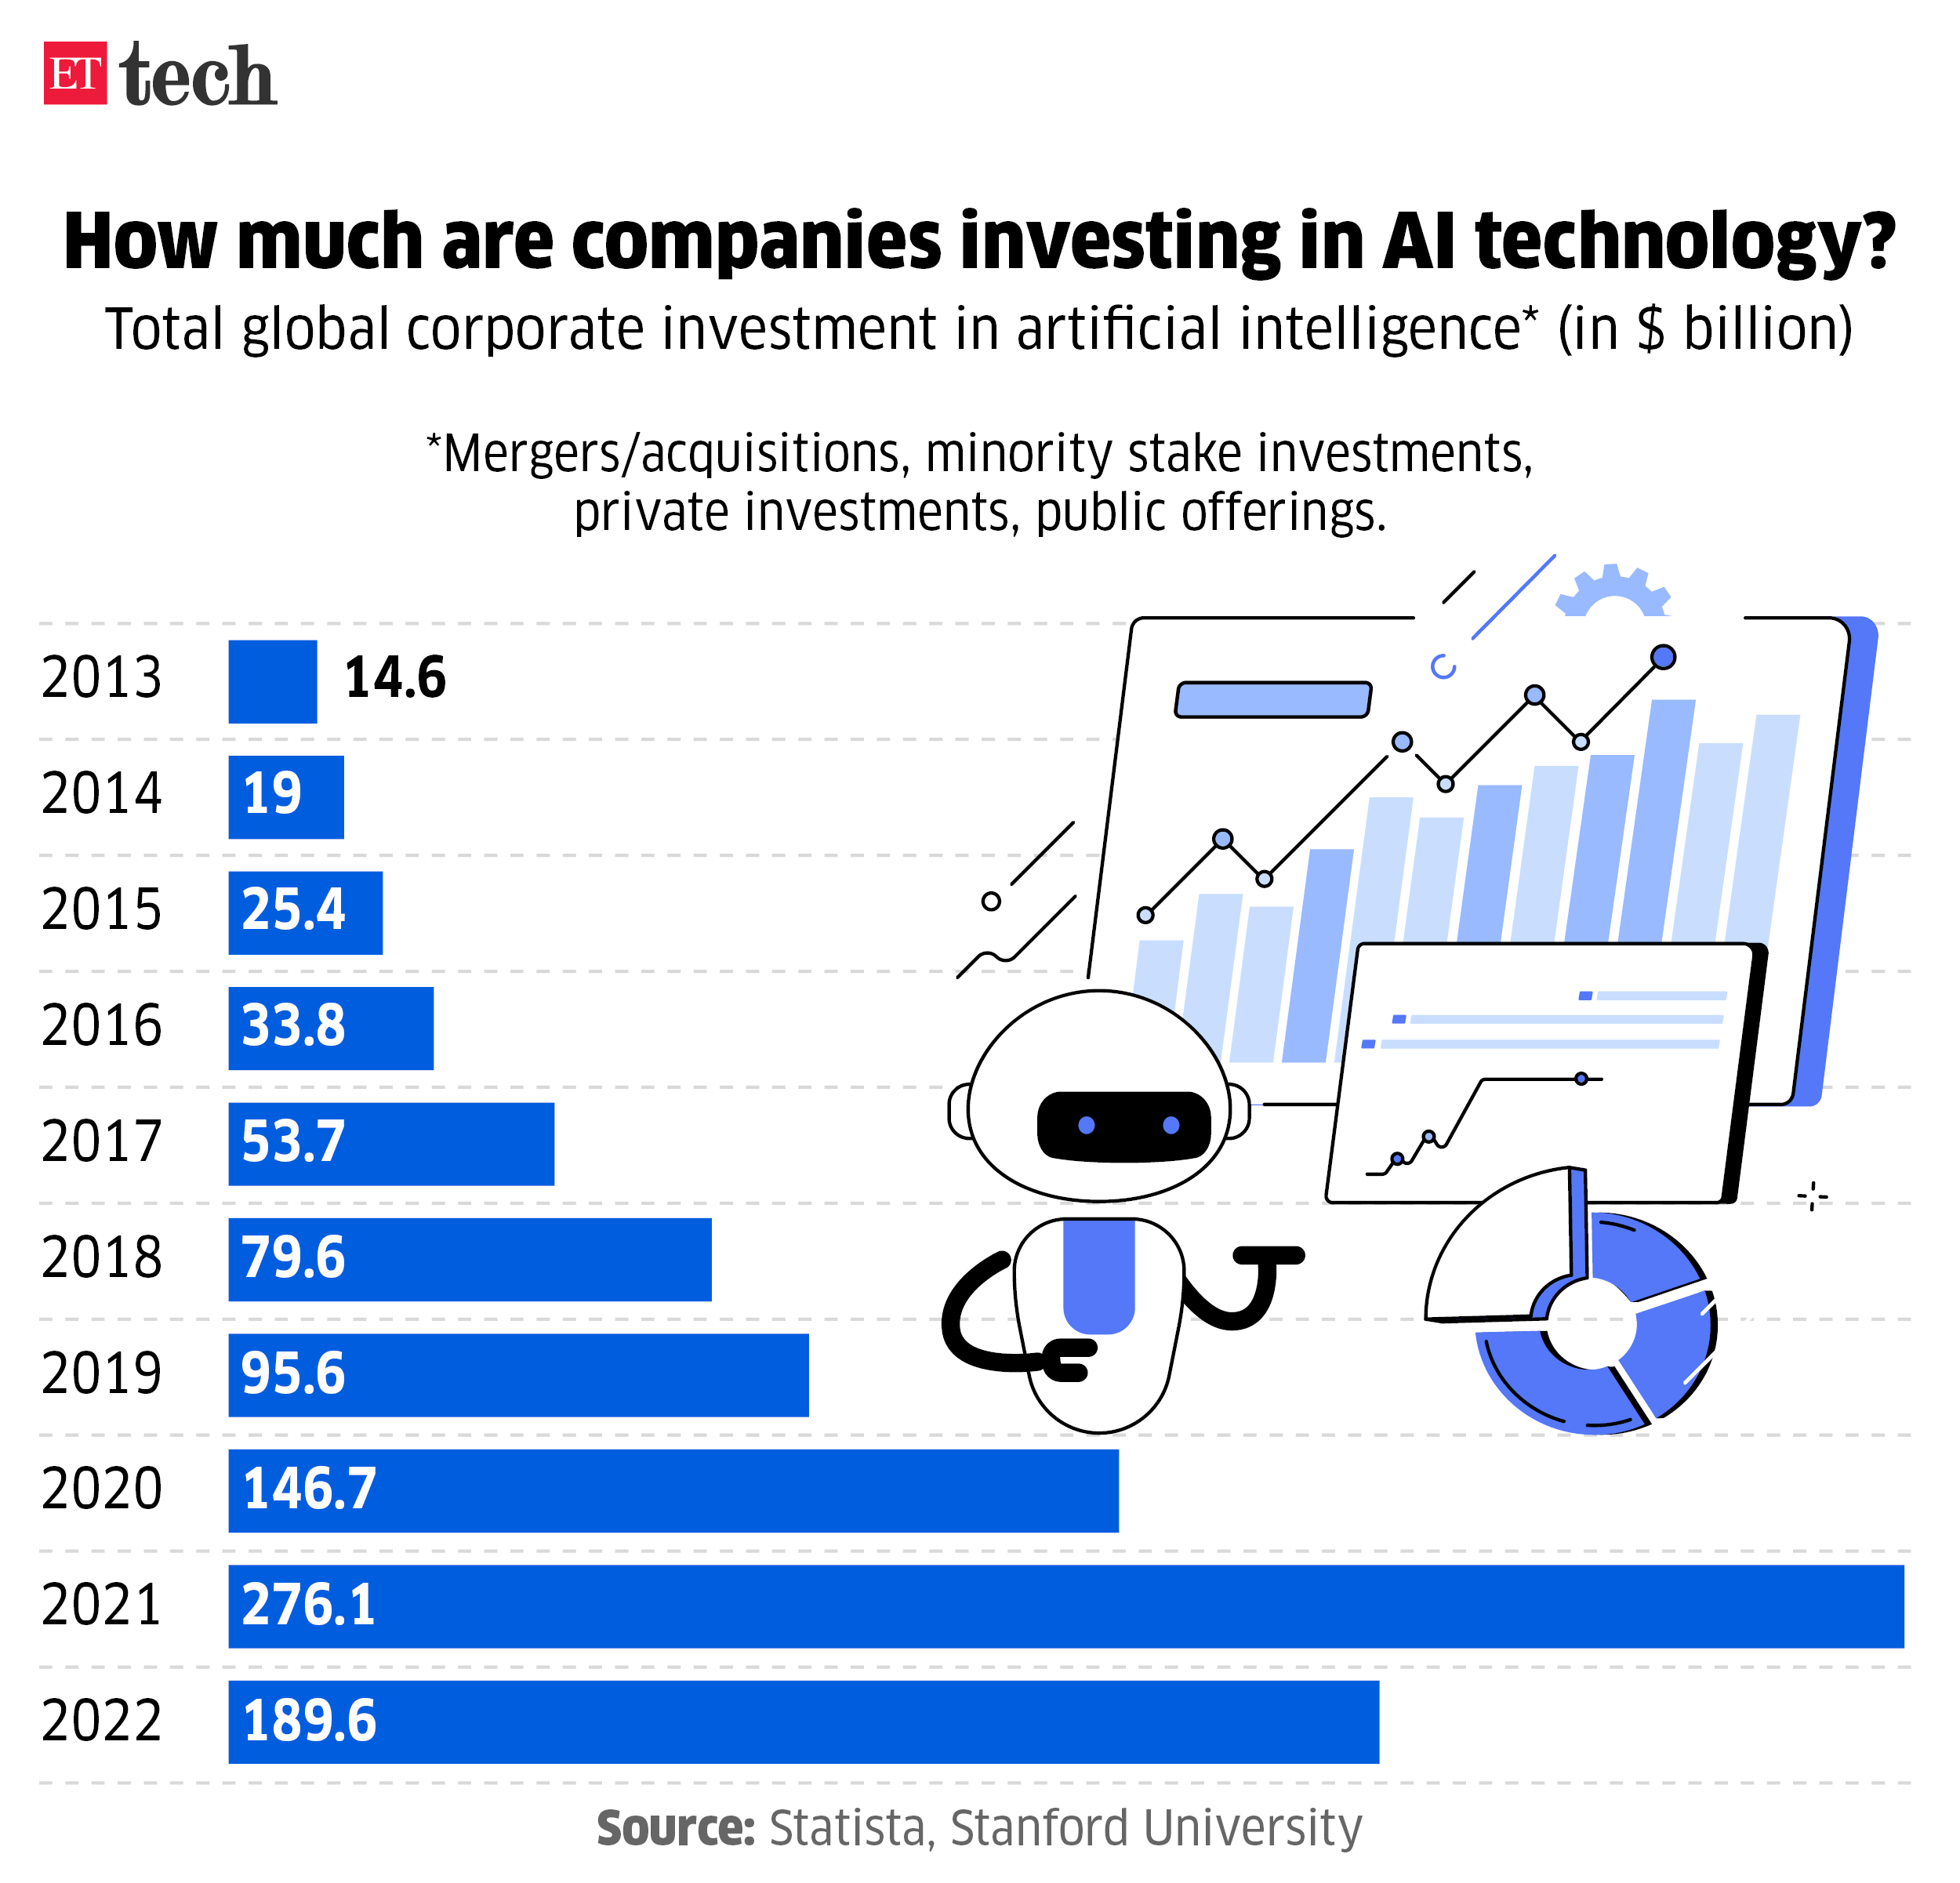 How much are companies investing in AI